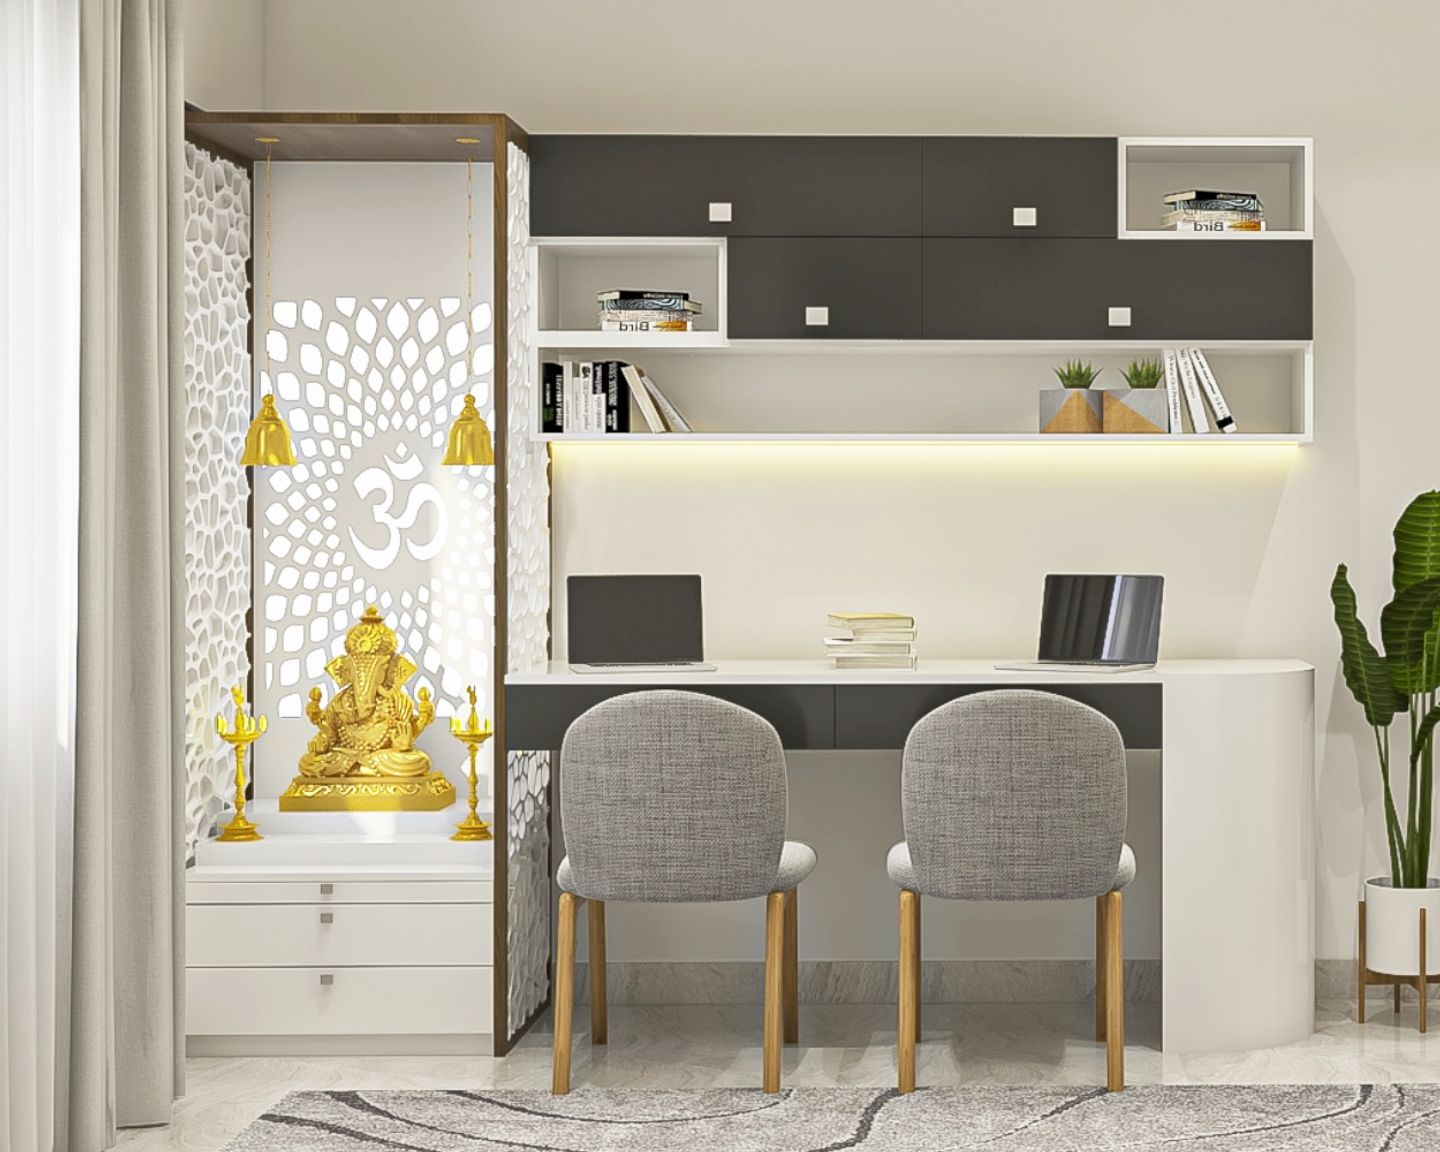 2x2x7 Ft Frosty White And Crescent Acacia Mandir Unit Design With Study Table - Livspace